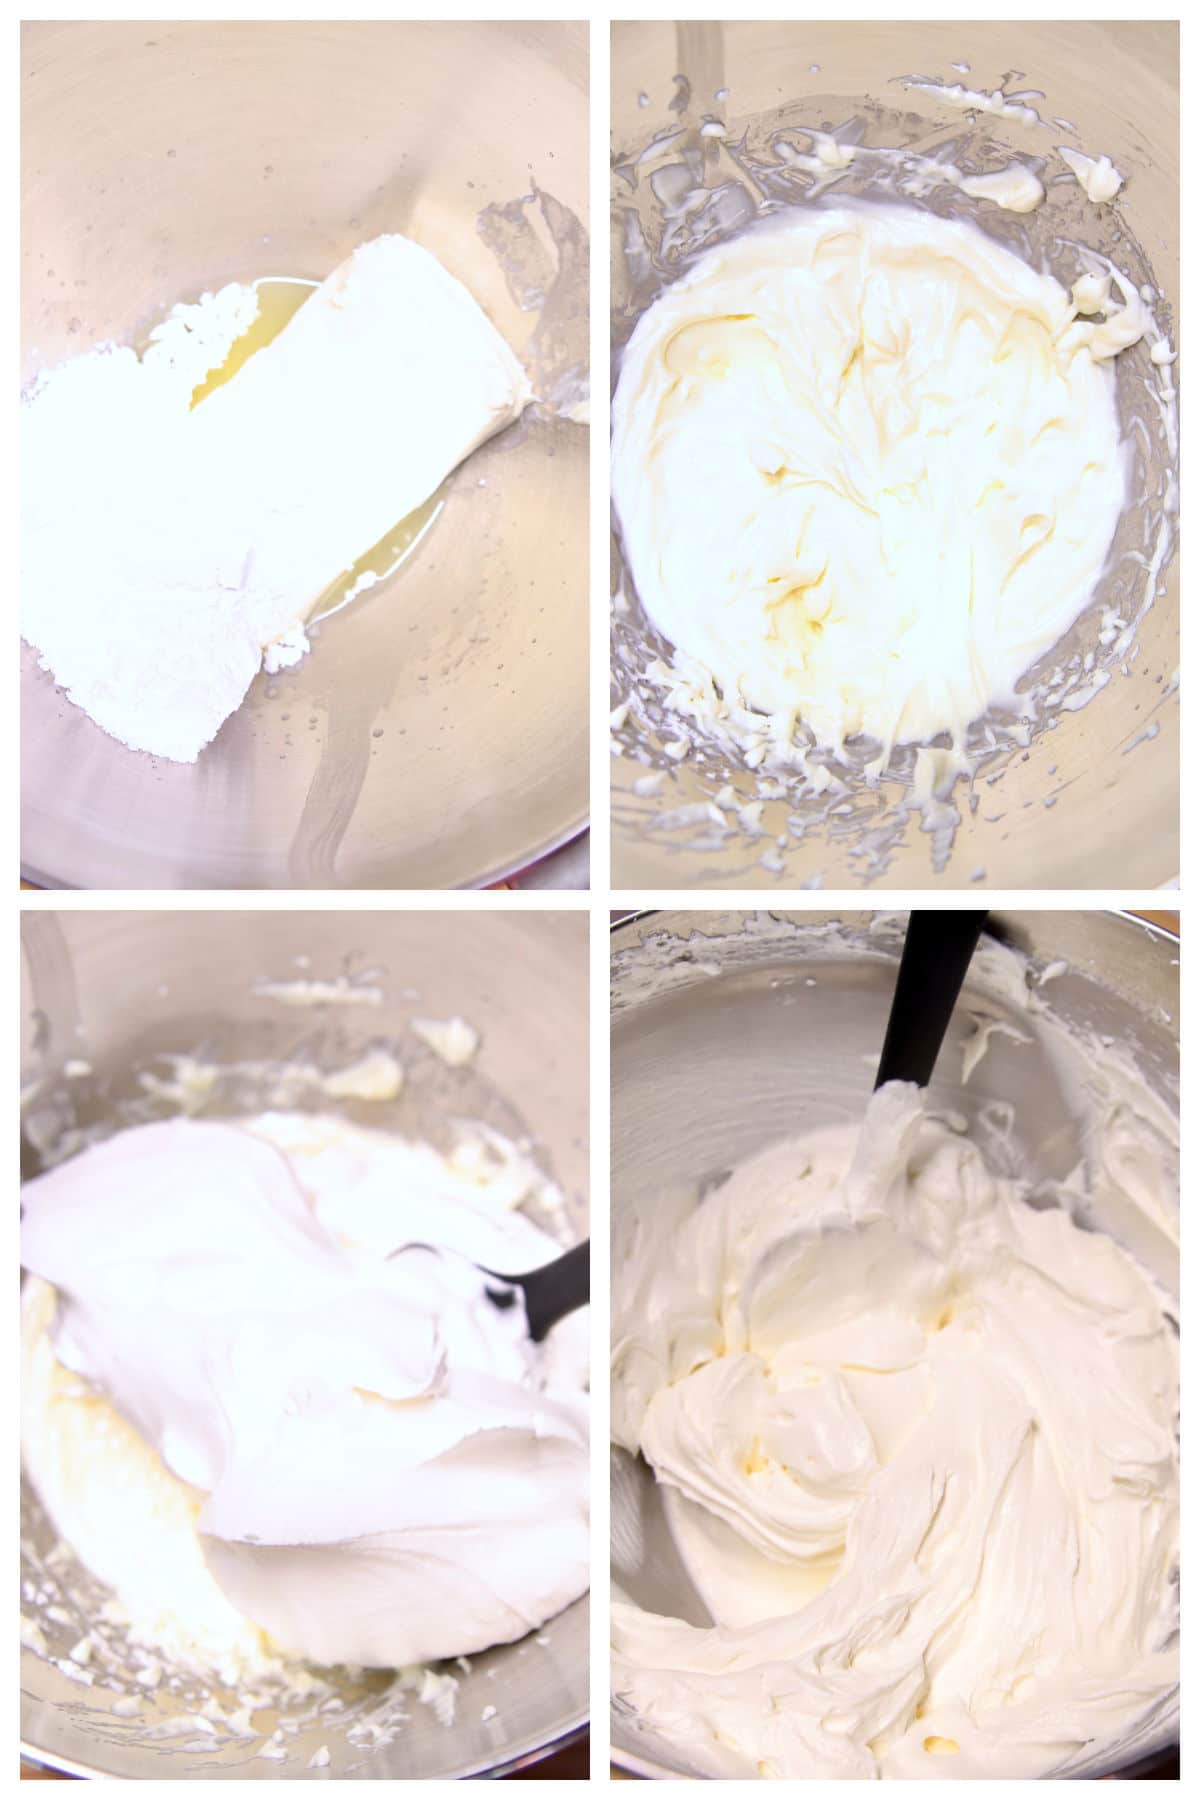 Collage making cheesecake filling for icebox cake.